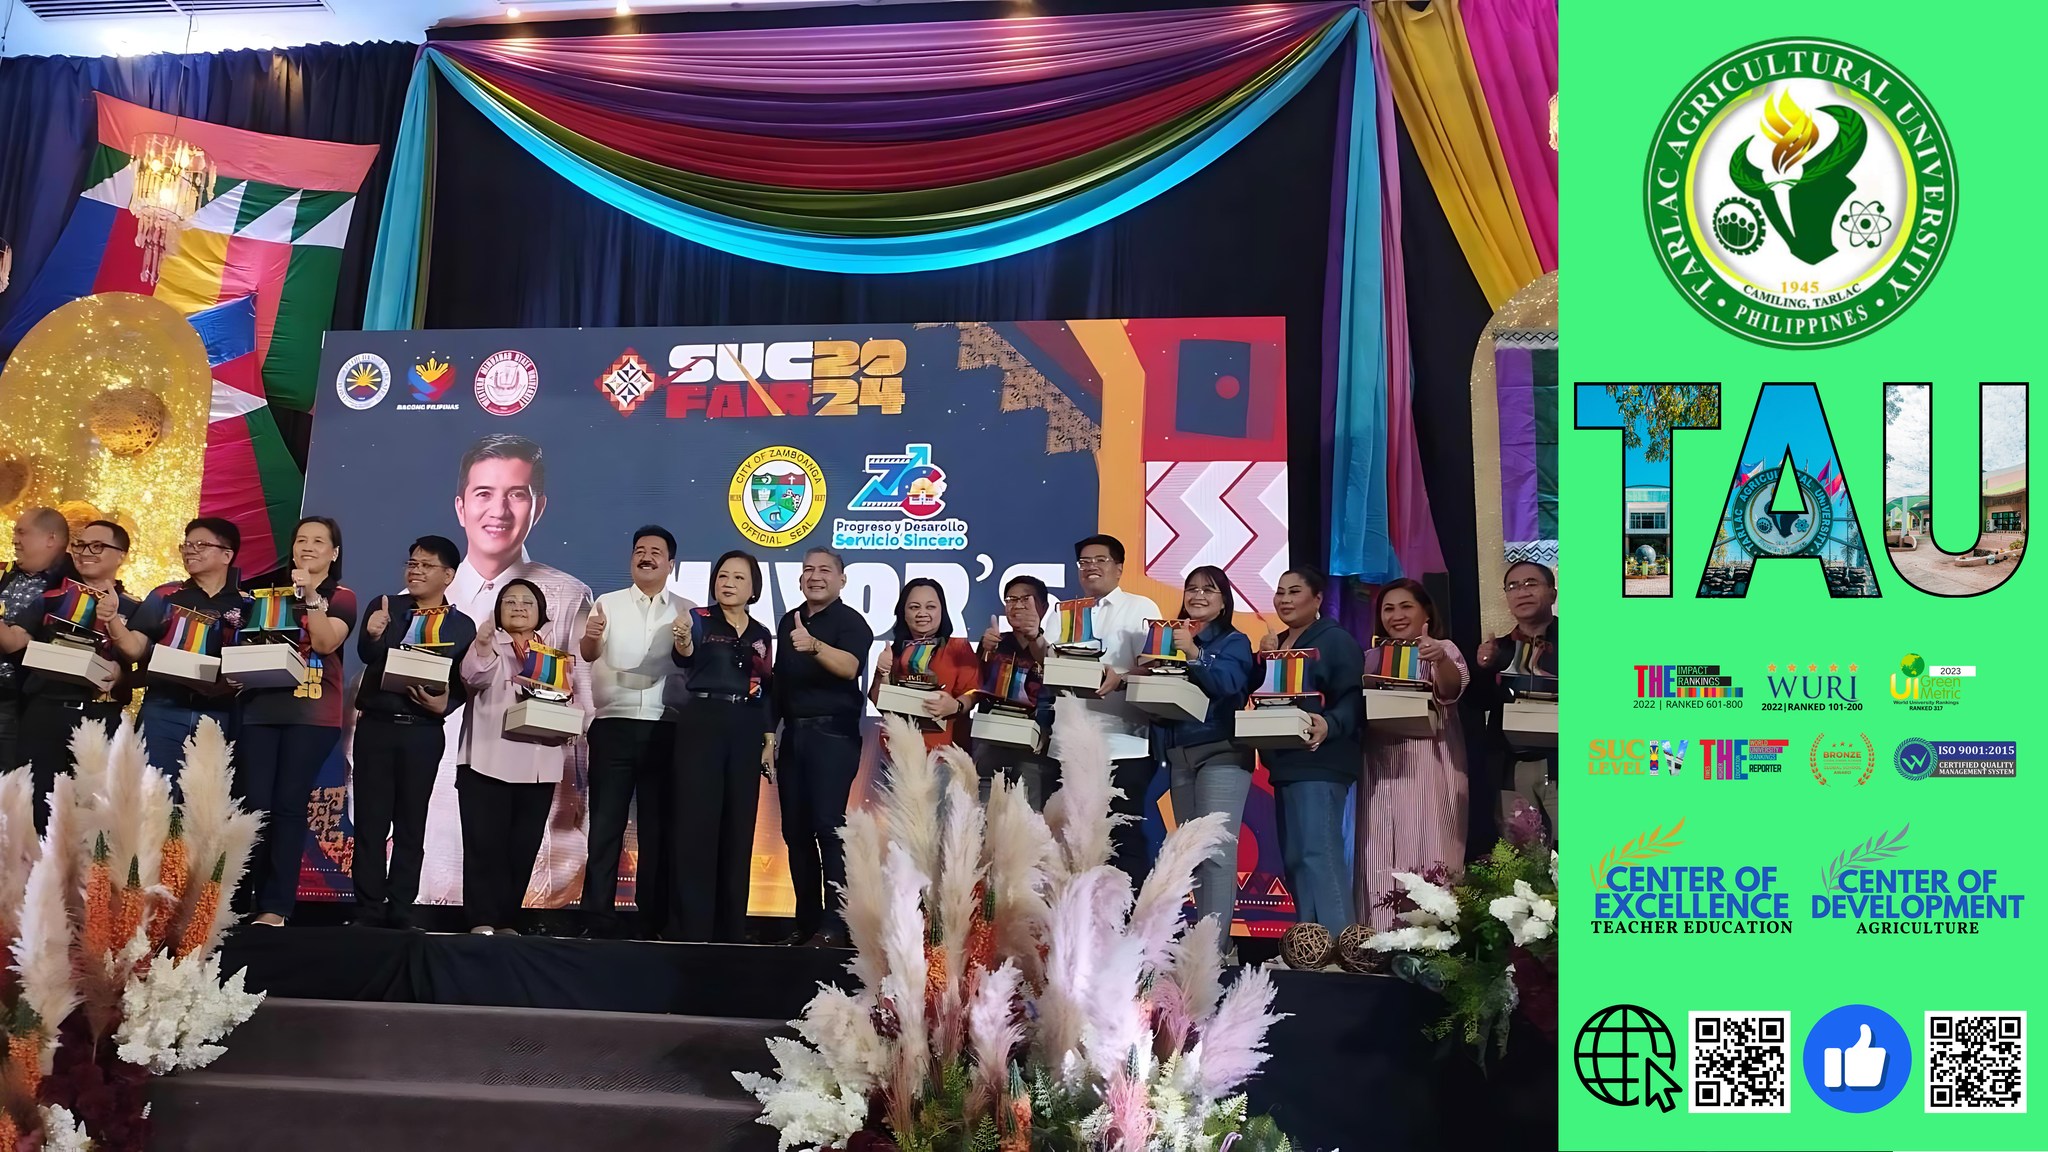 𝐂𝐀𝐏𝐓𝐔𝐑𝐄𝐃 𝐈𝐍 𝐋𝐄𝐍𝐒 | Joining his fellow SUC Presidents, Dr. Silverio Ramon DC. Salunson, Tarlac Agricultural University (TAU) President, attends the Mayor’s Night, one of the main events of the 2024 SUC Fair, at the Garden Orchid Convention Center, Zamboanga City, 10 July